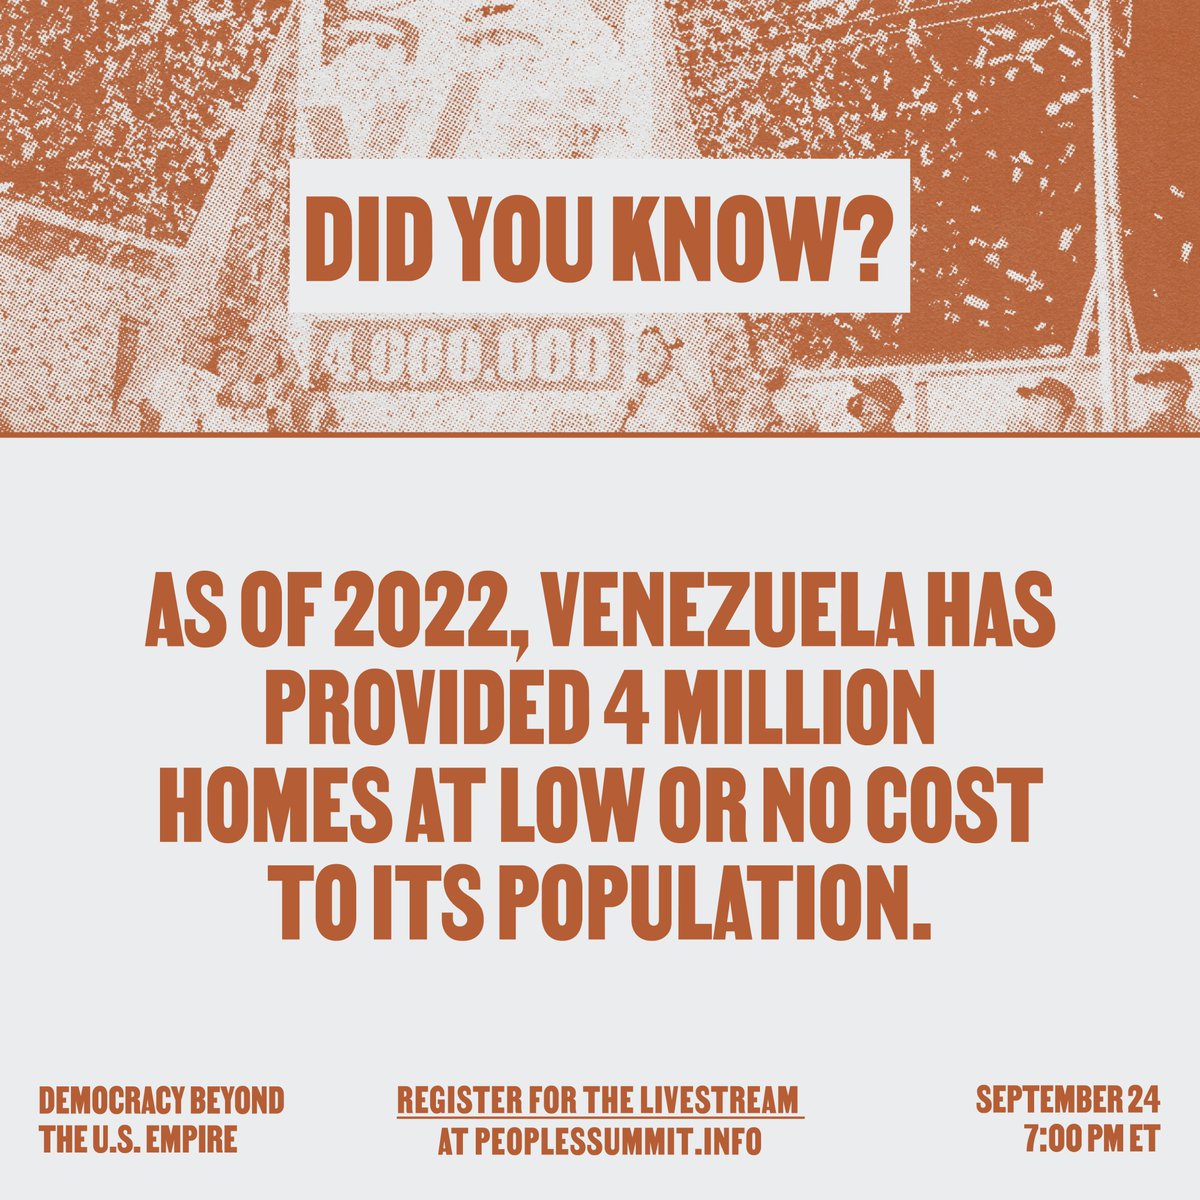 This year, the Great Housing Mission of Venezuela (GMVV), launched by Commander Hugo Chávez in 2011, has reached a milestone of providing over 4 million homes to its people. By contrast, U.S. has evicted over 1 million people since March 2020 with over 8,000 last week alone.